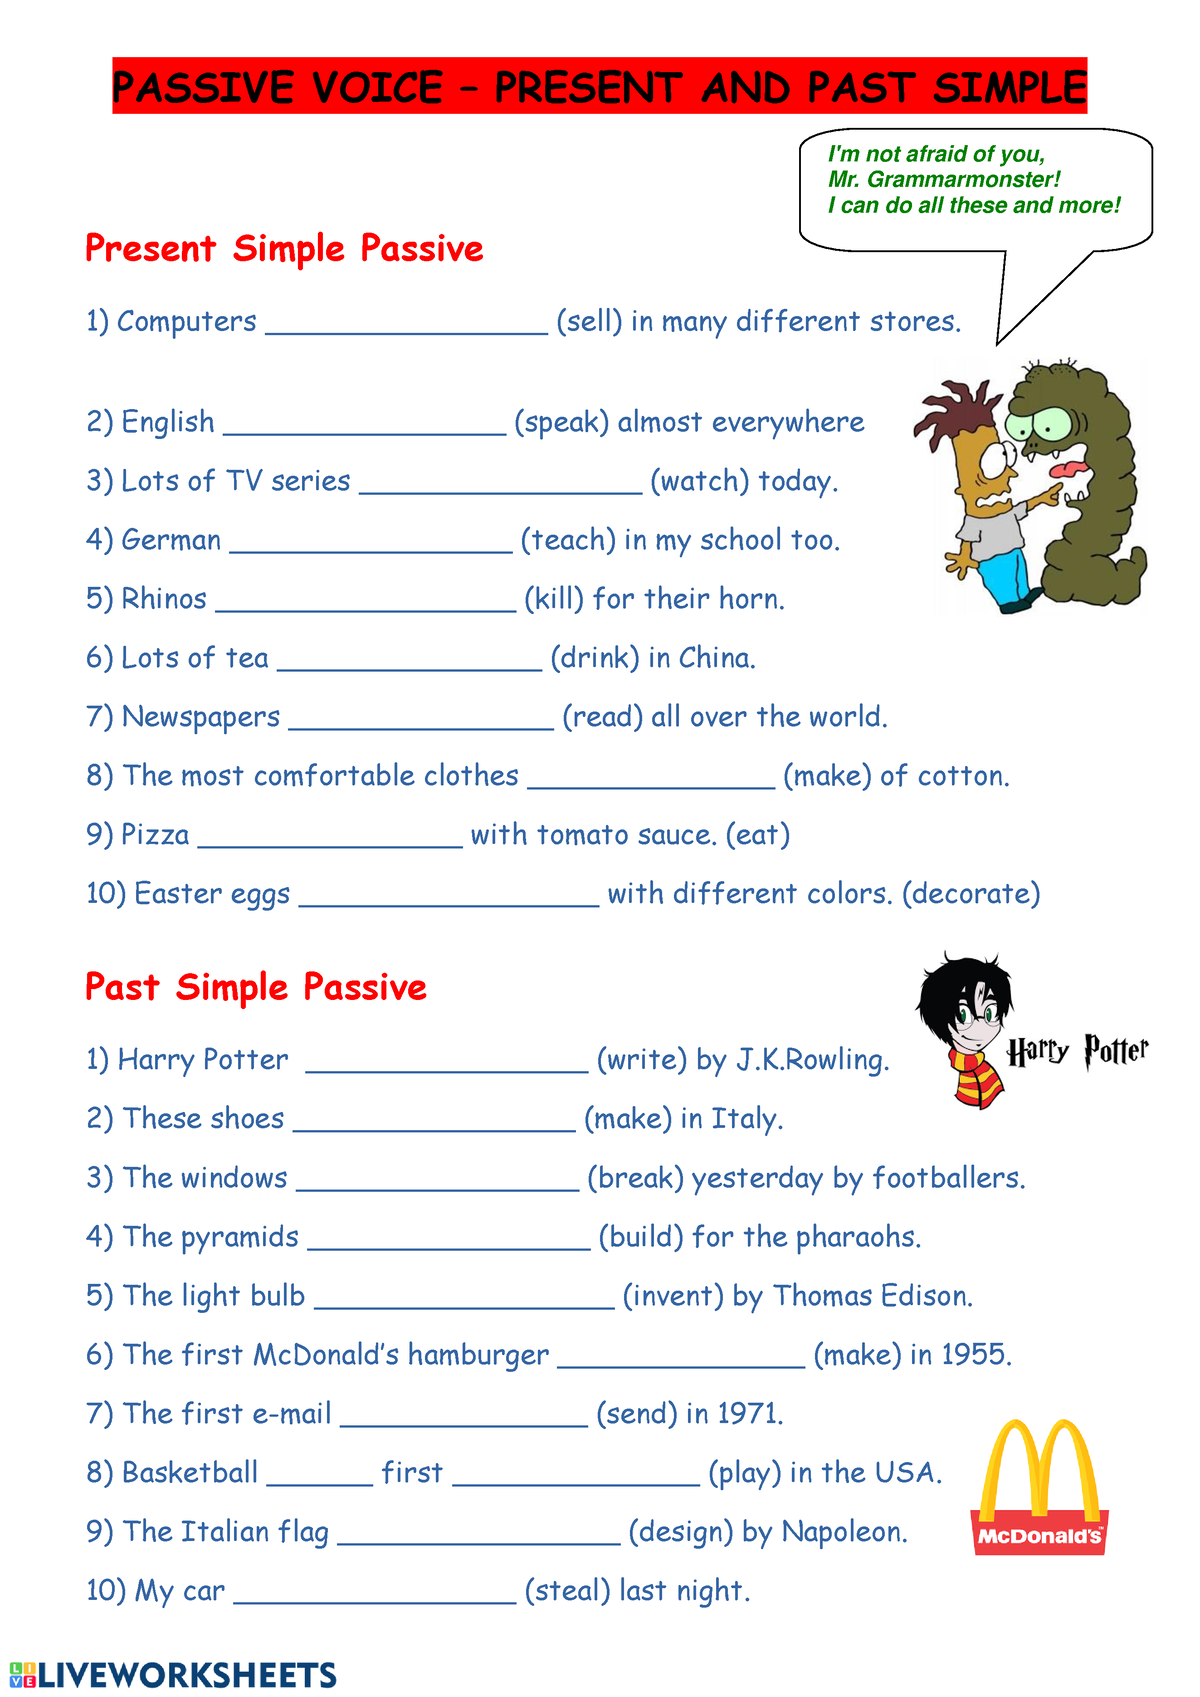 activity-4-passive-voice-with-the-present-and-past-simple-passive-voice-present-and-past